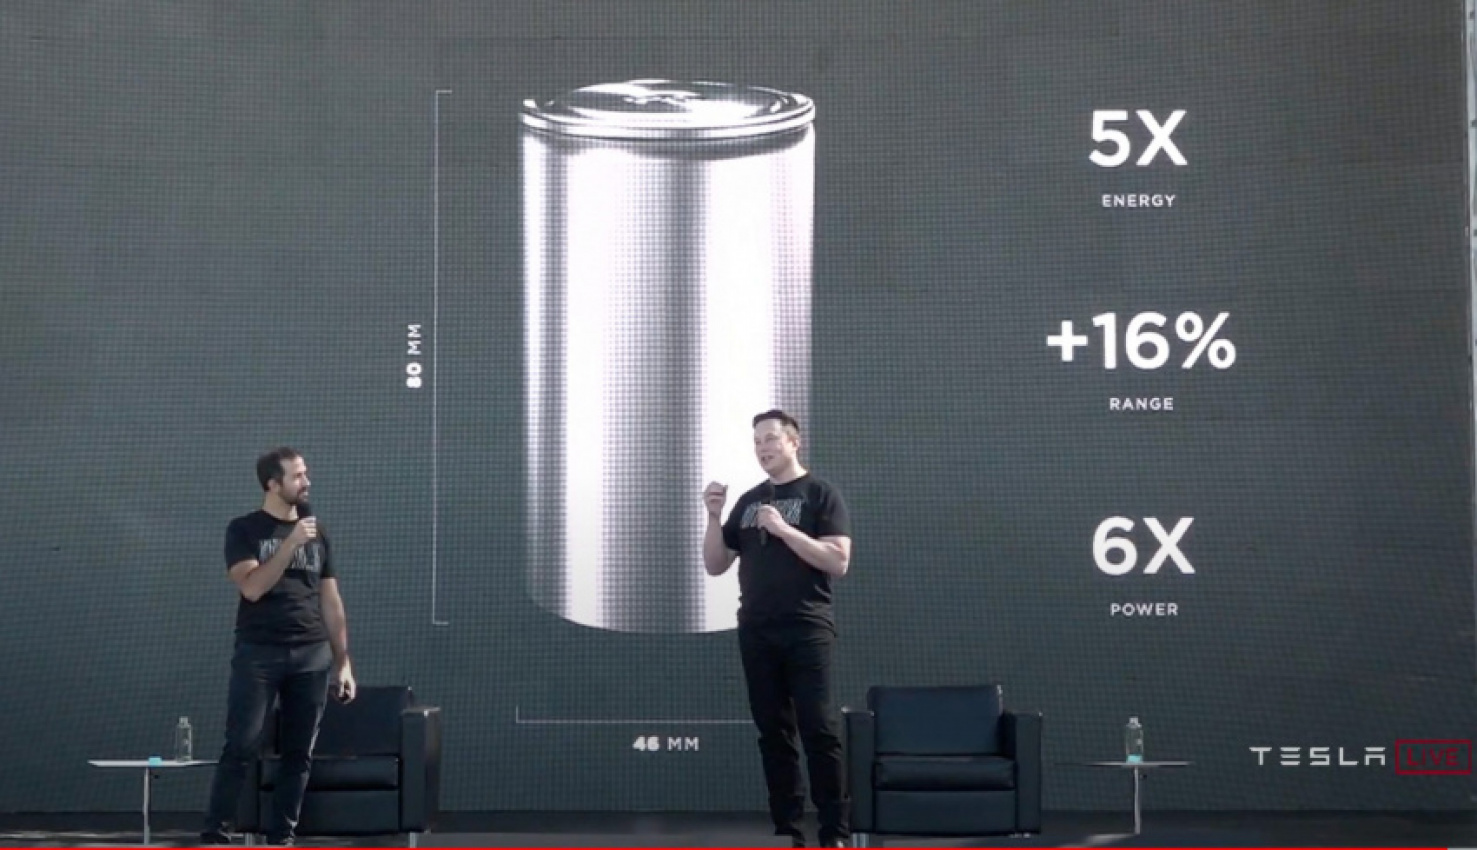 autos, cars, news, space, spacex, tesla, panasonic will invest $705 million to launch tesla 4680 battery production in 2023